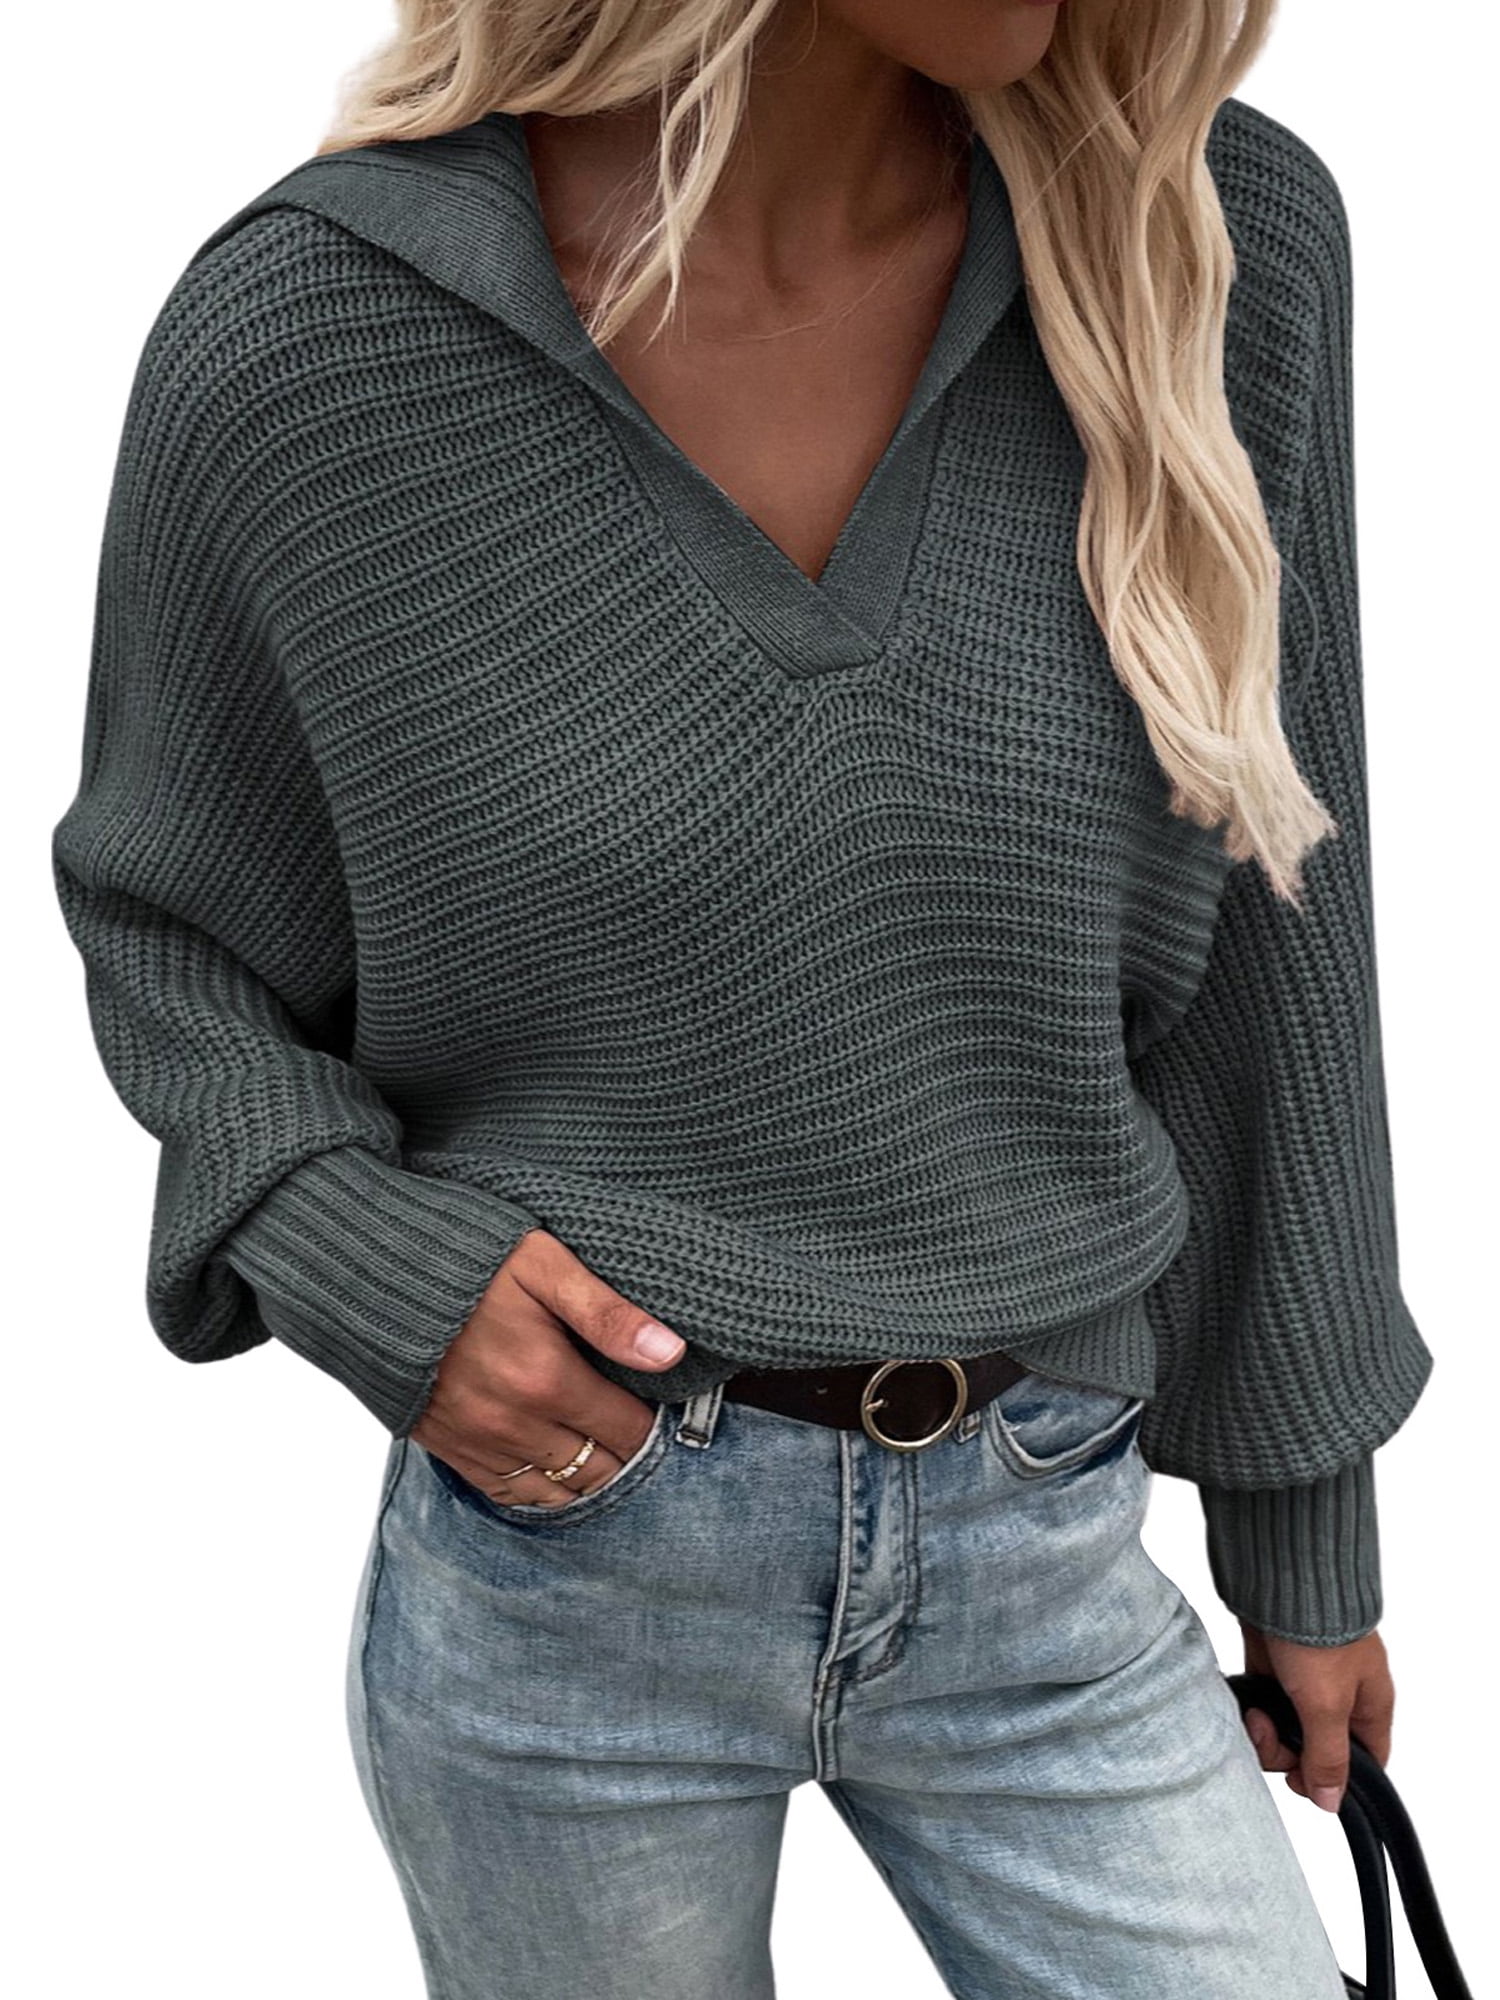 Women's Loose Knitted Pullover Jumper Sweater V Neck Long Sleeve Knitwear Tops 